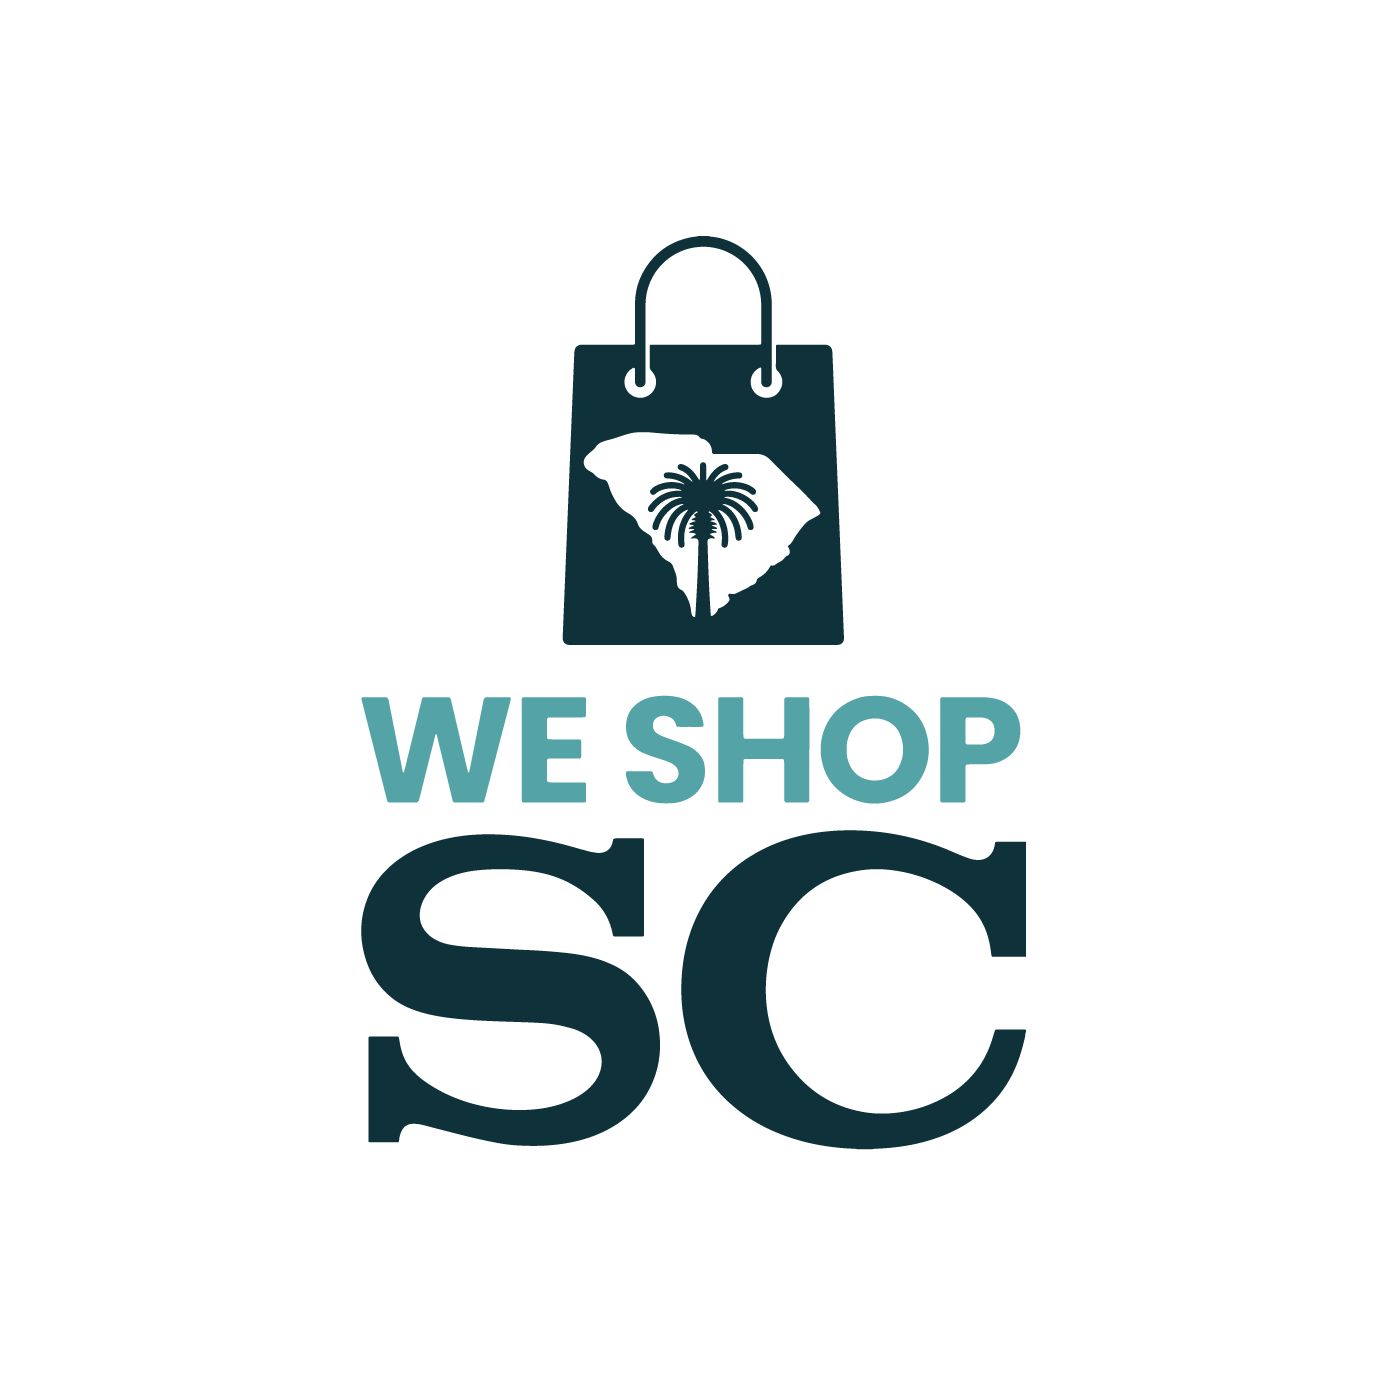 WeShopSC Helps Local Communities